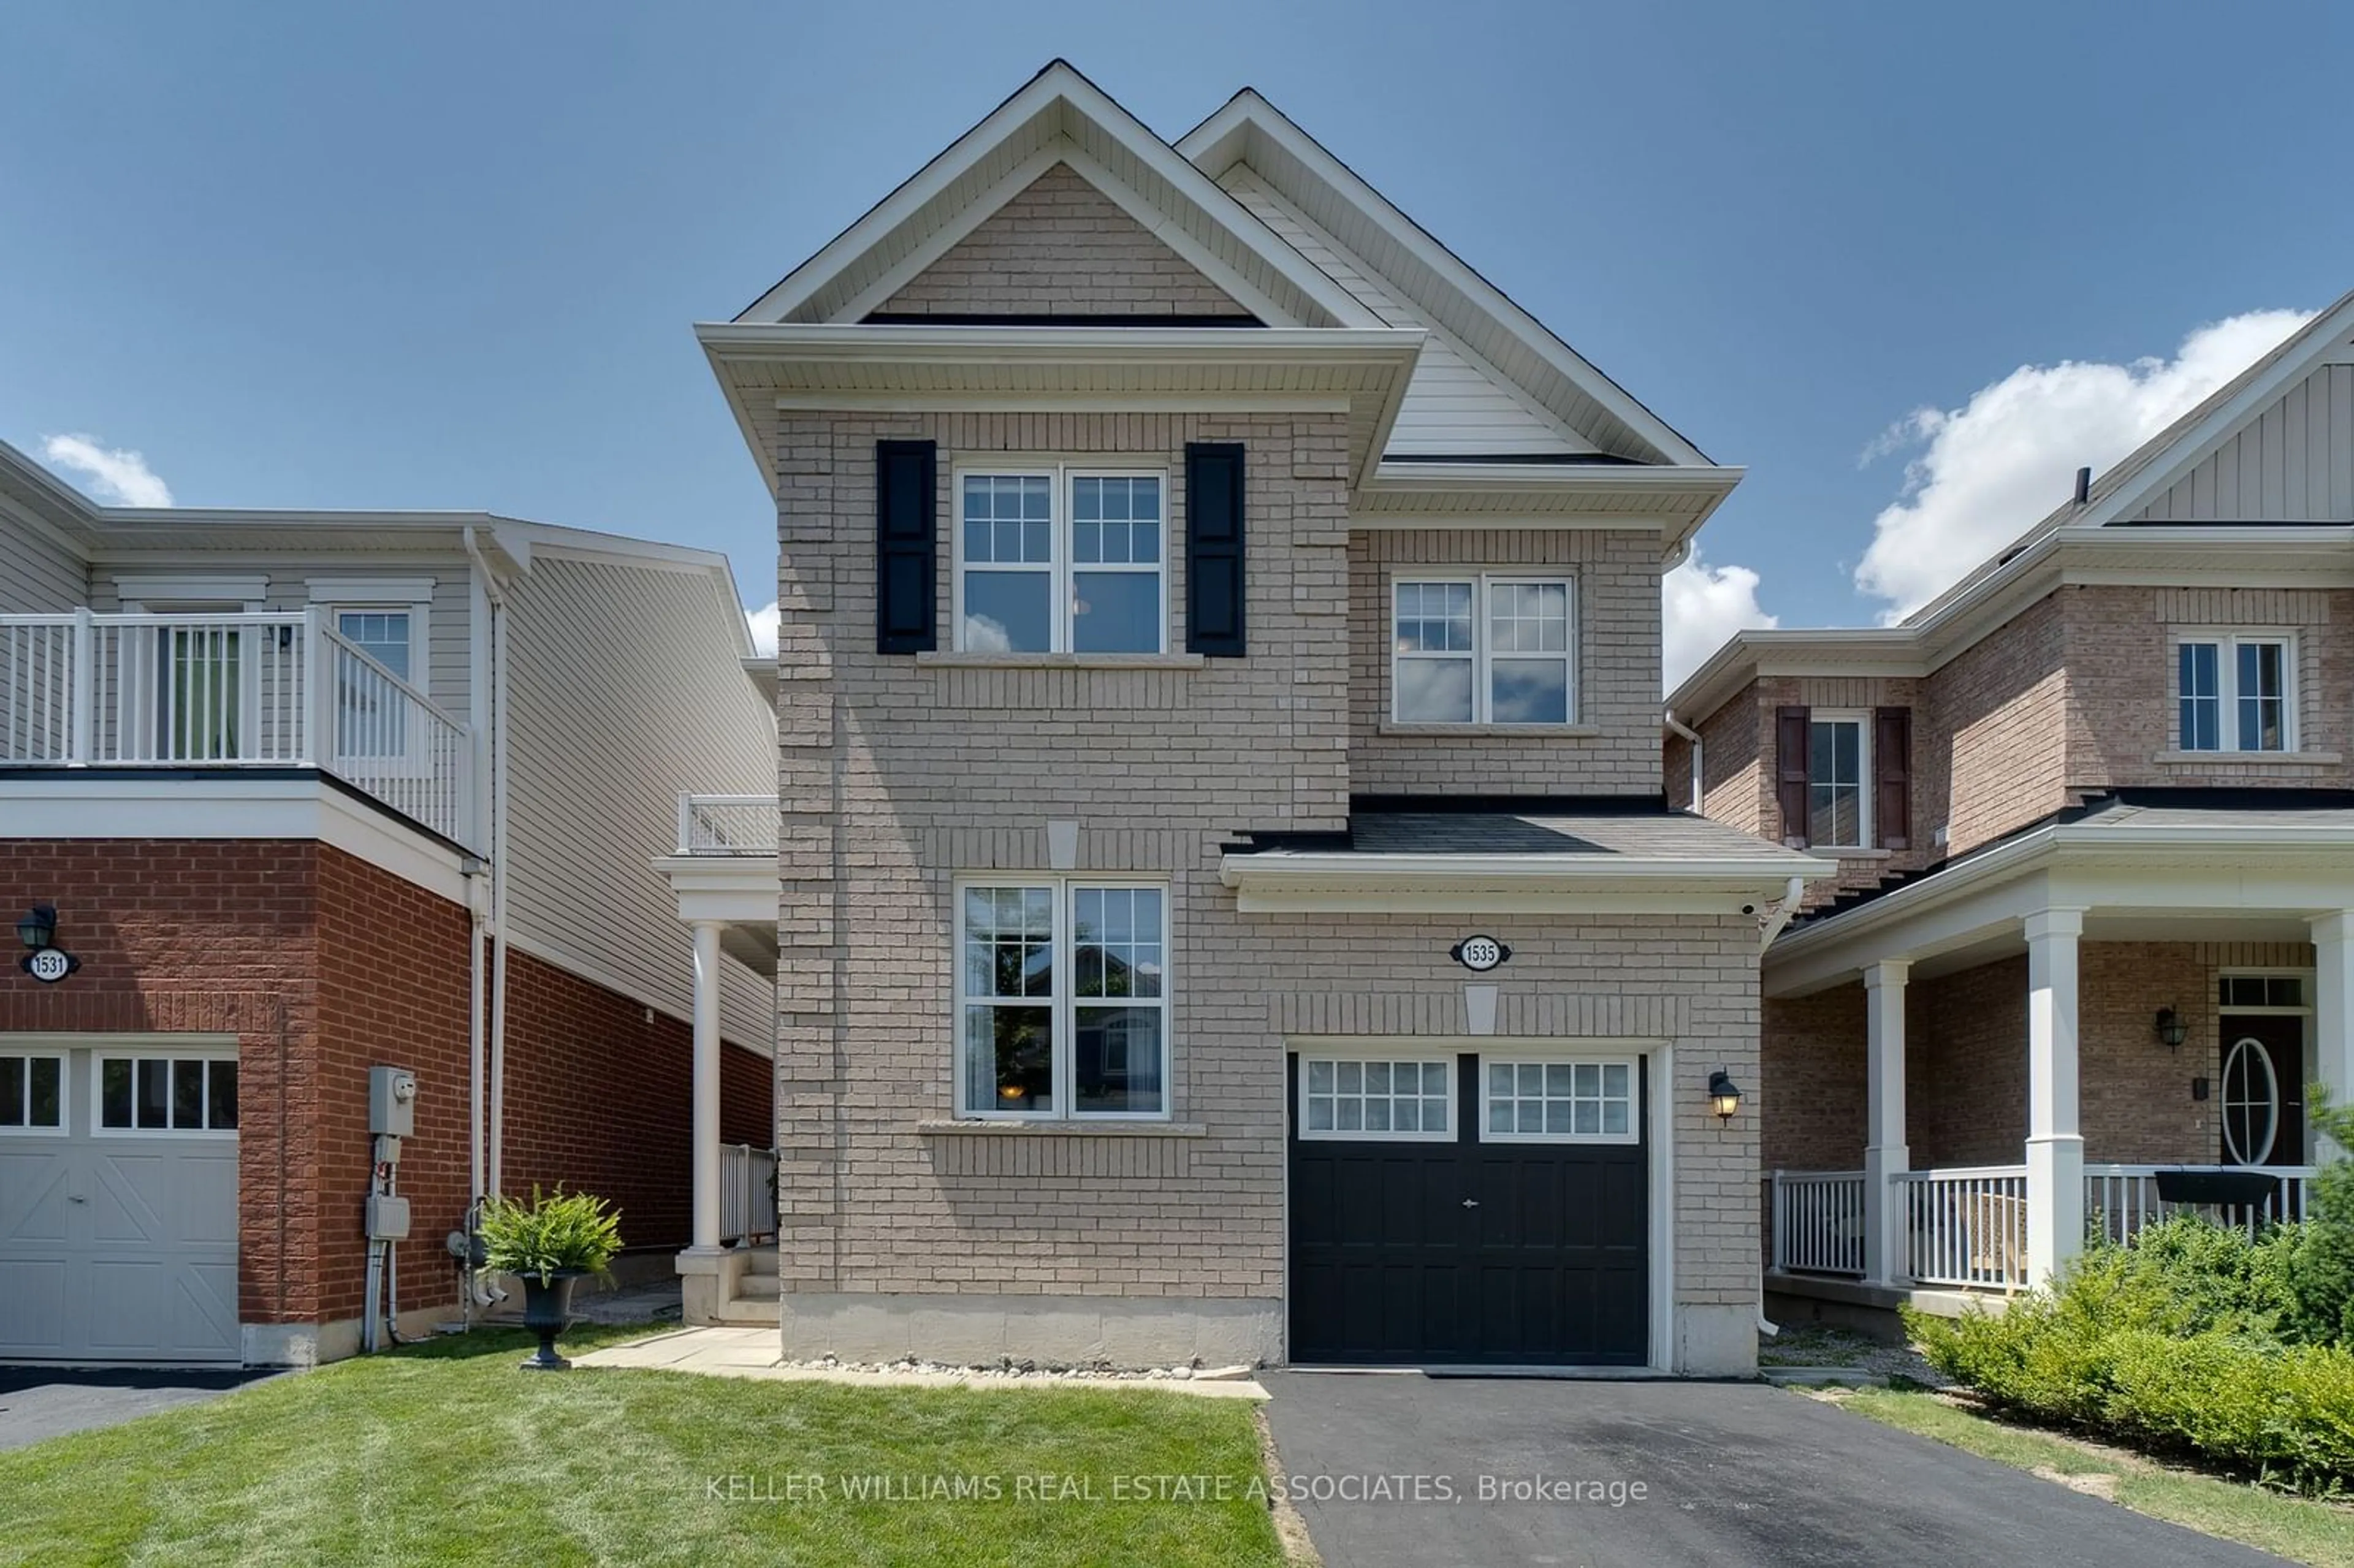 Home with brick exterior material for 1535 Tough Gate, Milton Ontario L9T 8Y6